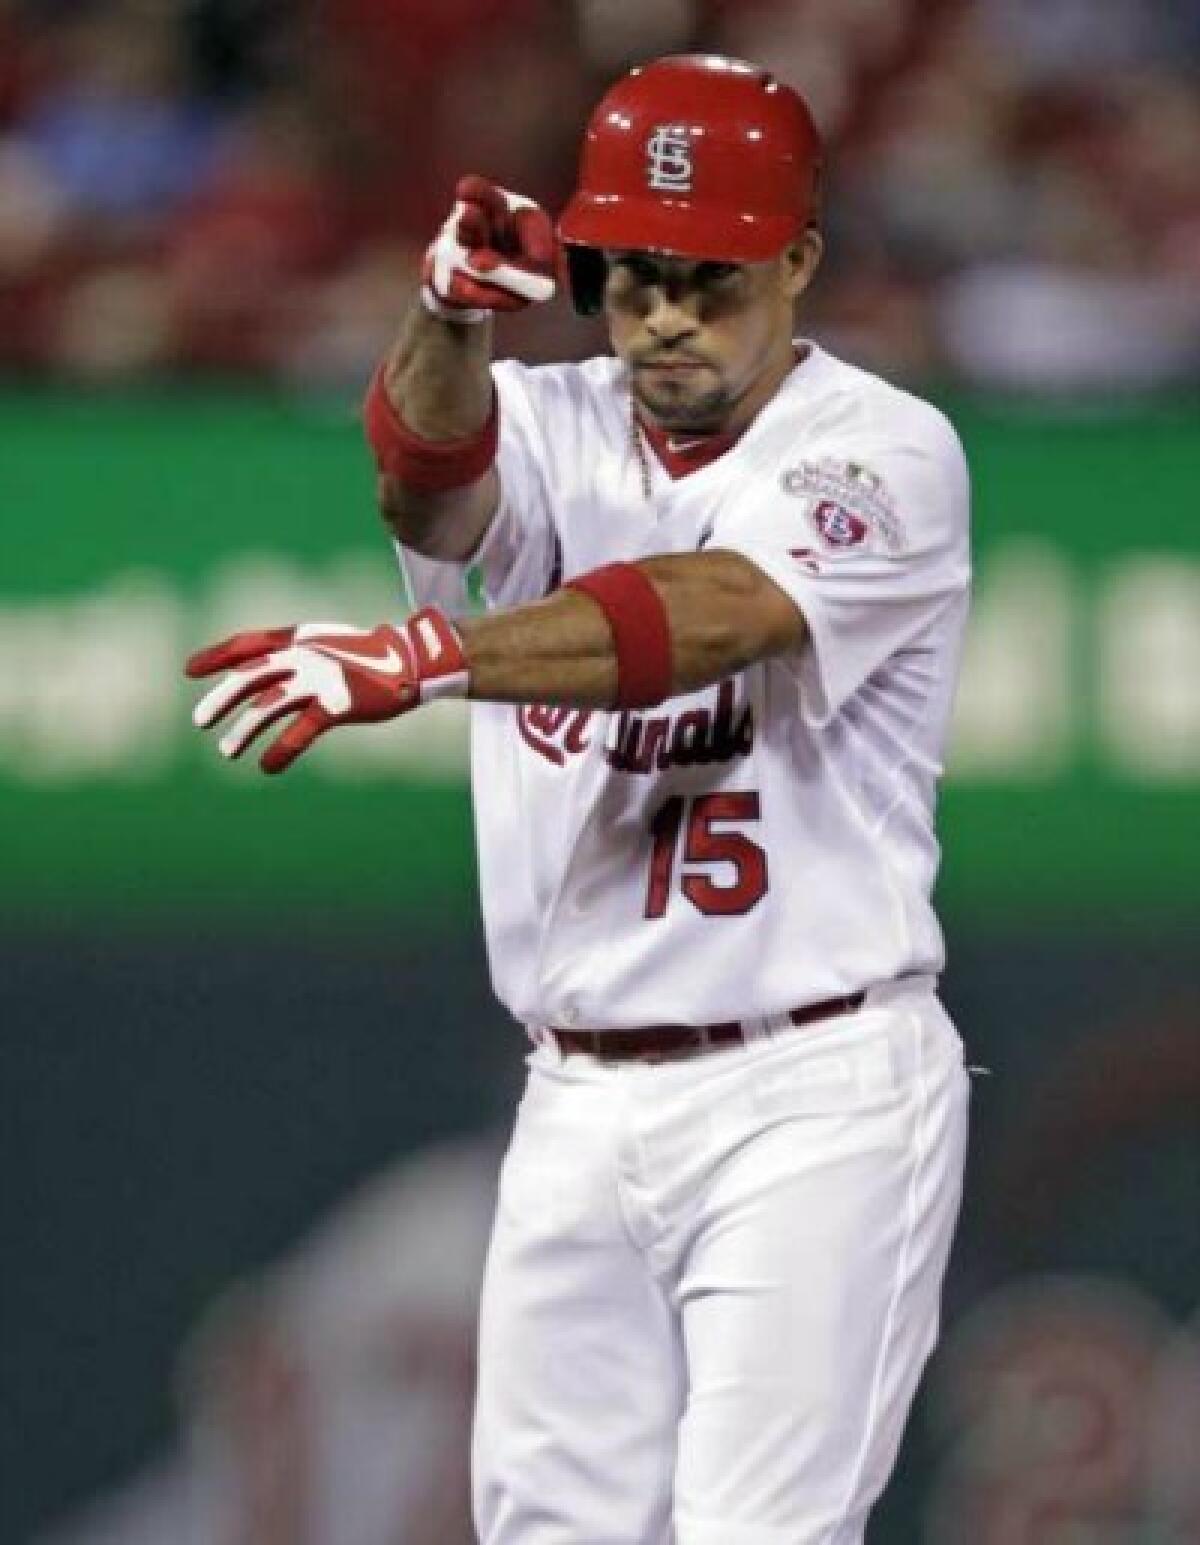 St. Louis Cardinal Rafael Furcal gestures back to the dugout after hitting a double in the third inning of a baseball game against the Arizona Diamondbacks Aug. 16 in St. Louis.